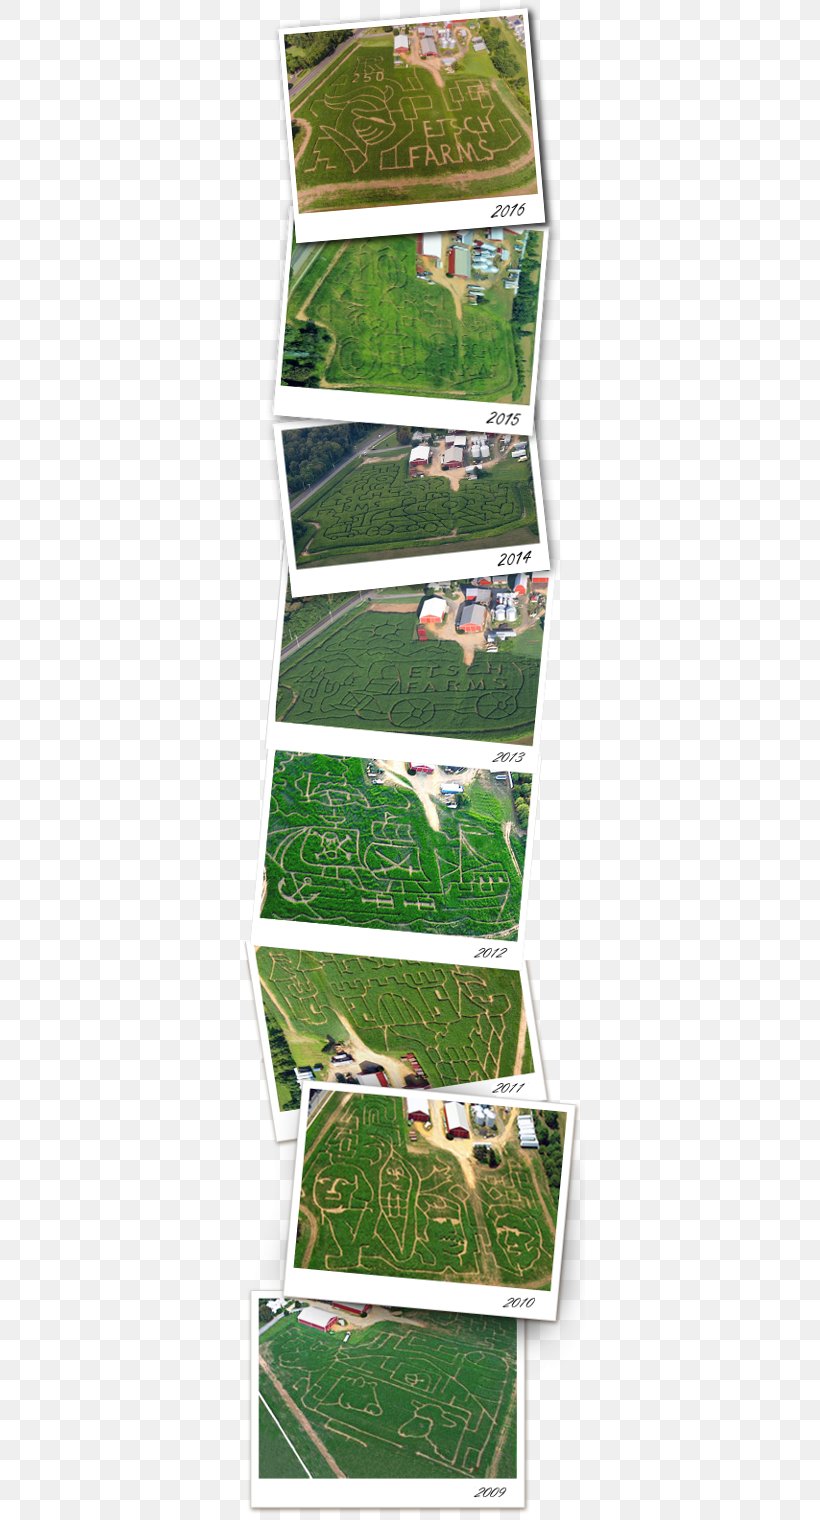 Etsch Farms Corn Maze Hayride Haunted Attraction, PNG, 350x1520px, Farm, Celebrity, Corn Maze, Grass, Grass Family Download Free